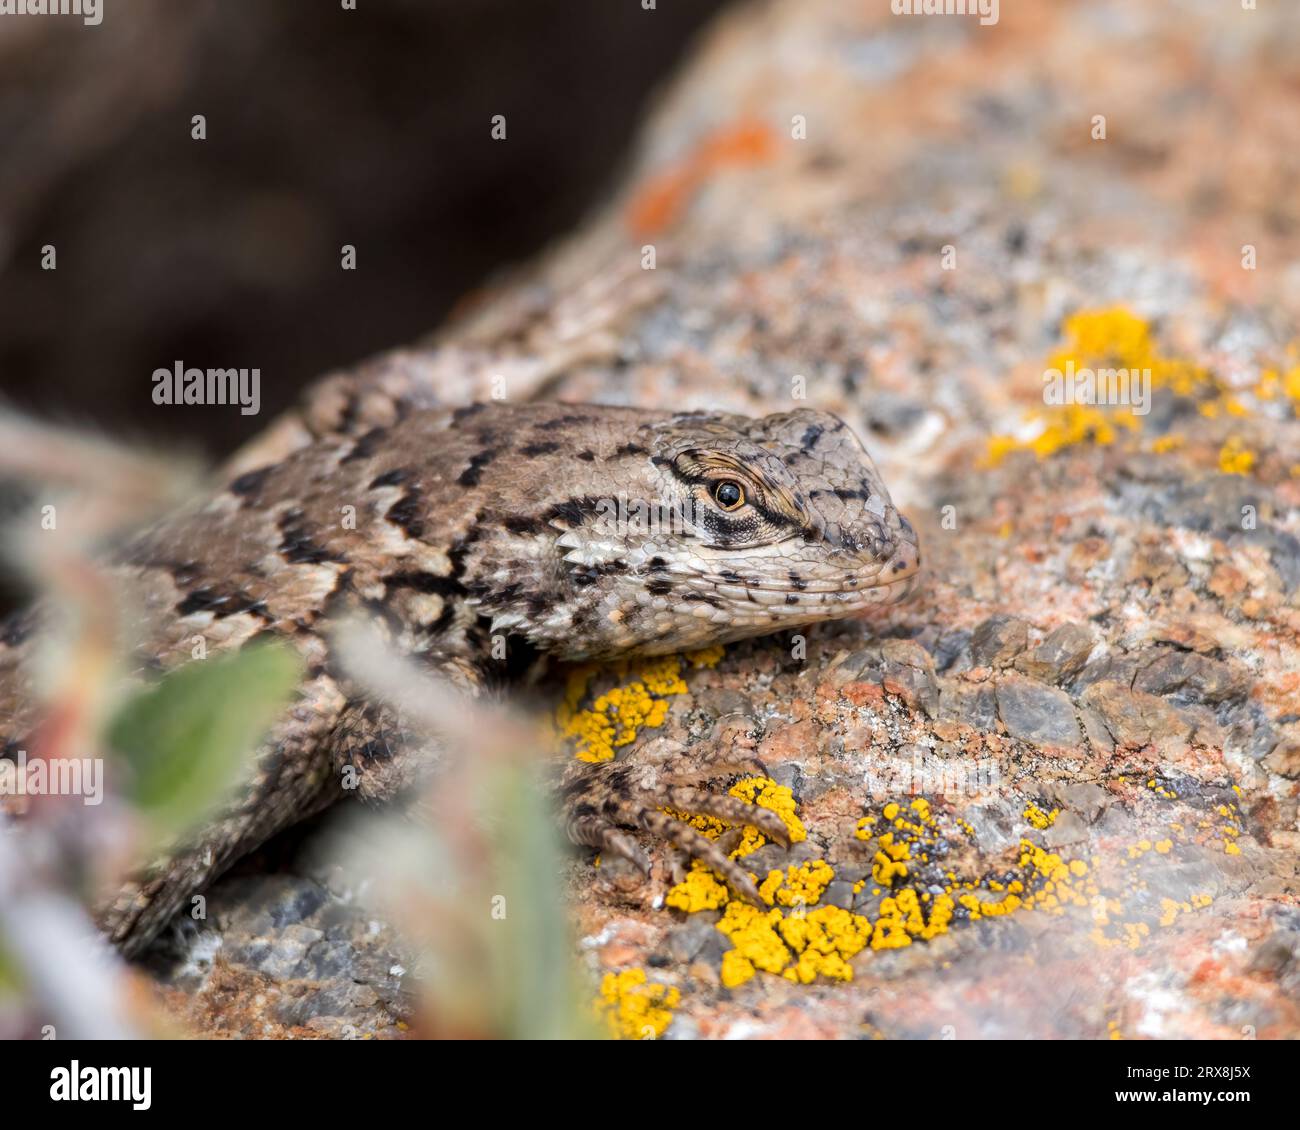 A Common Sagebrush Lizard blends in against a lichen-covered rock. Stock Photo